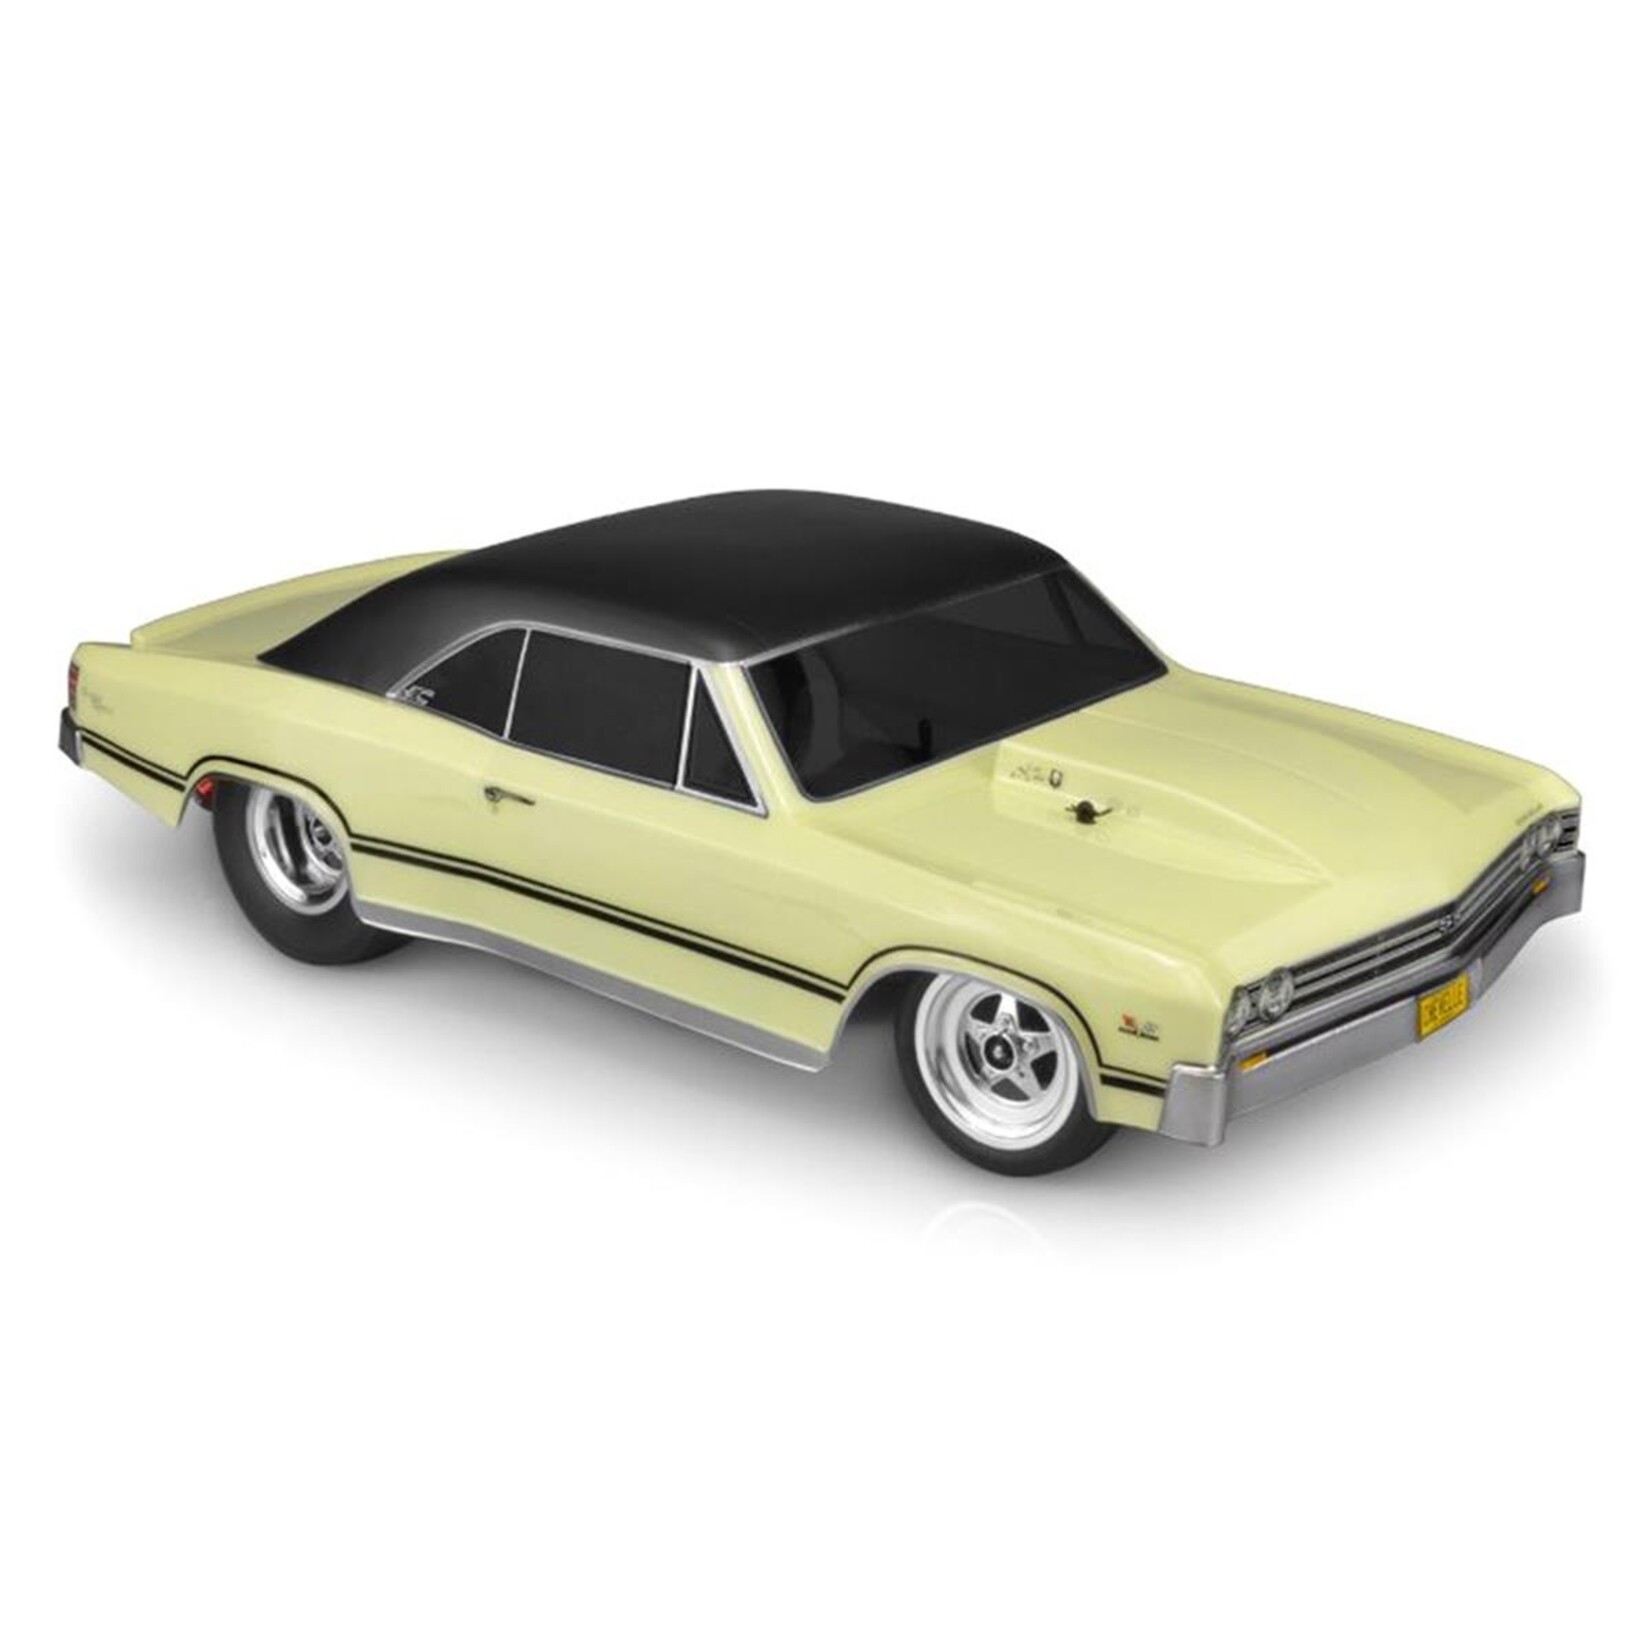 JConcepts JConcepts 1967 Chevy Chevelle Street Eliminator Drag Racing Body (Clear) #0358